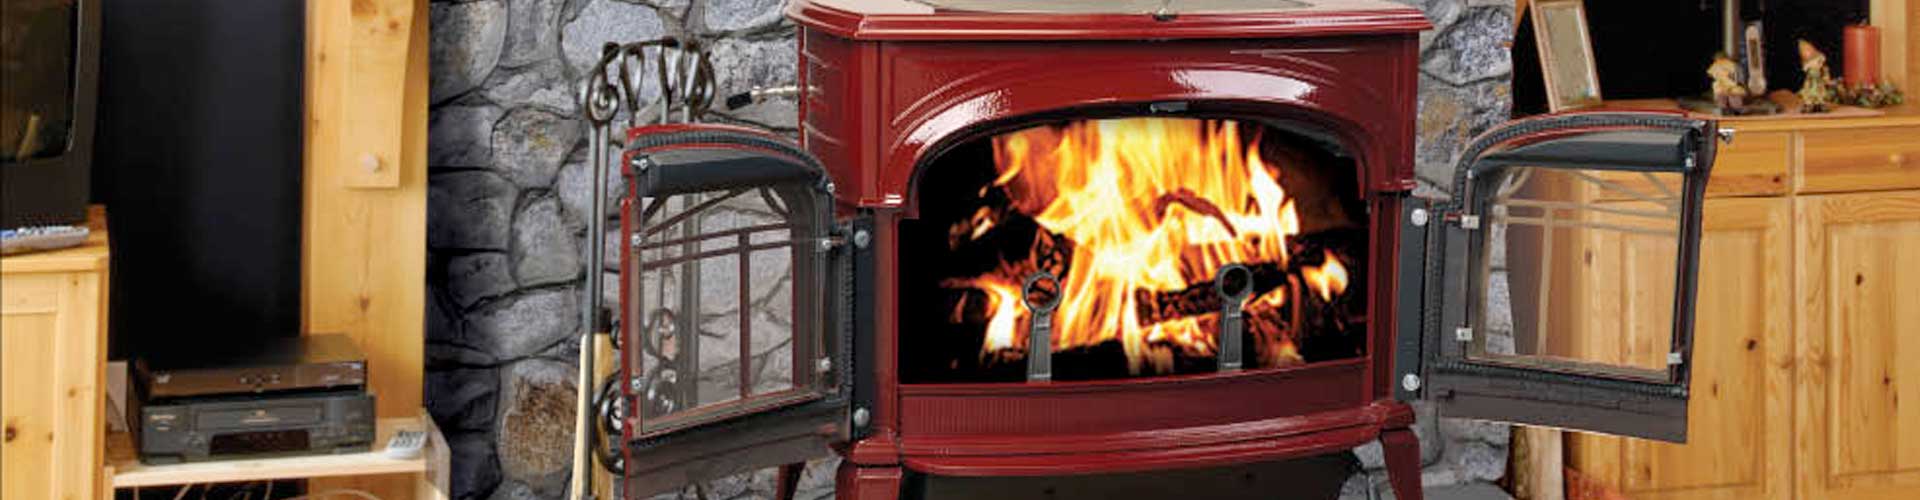 Vermont Casting Wood Stoves